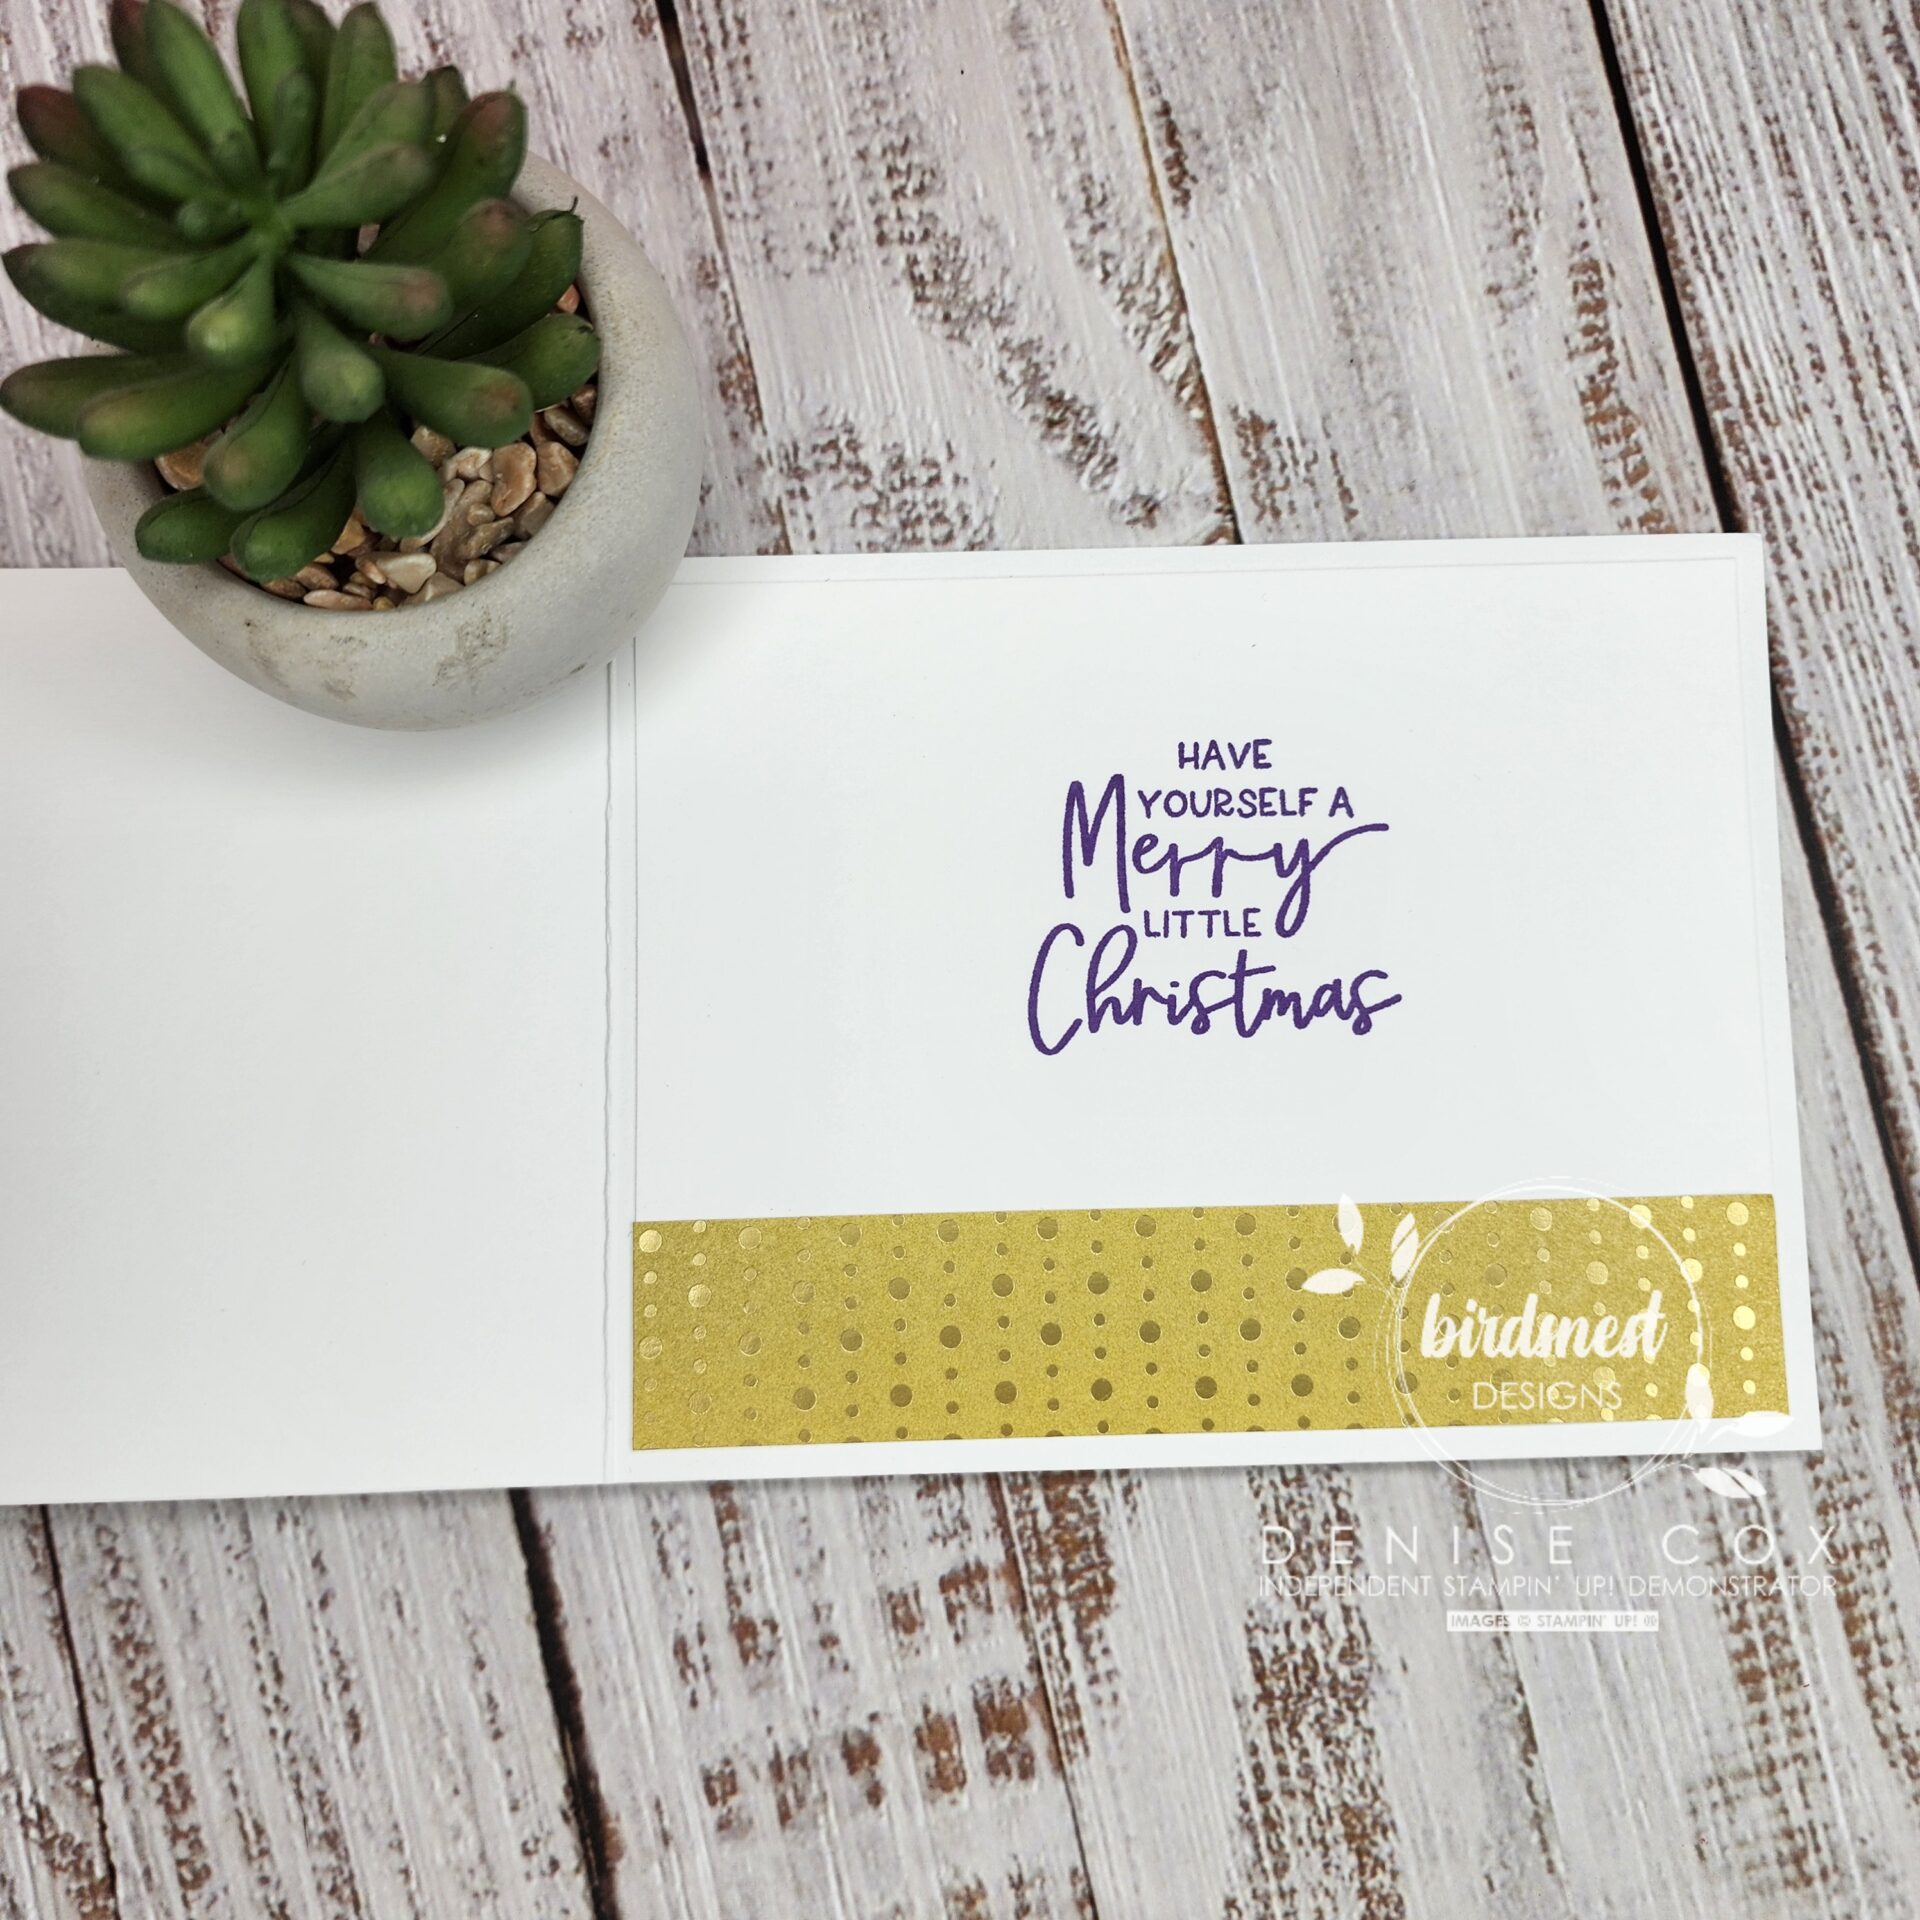 Retro vibe Christmas card made in purple and gold unsing Stampin' Up! Spruced Up bundle and Festive Foils Specialty Paper